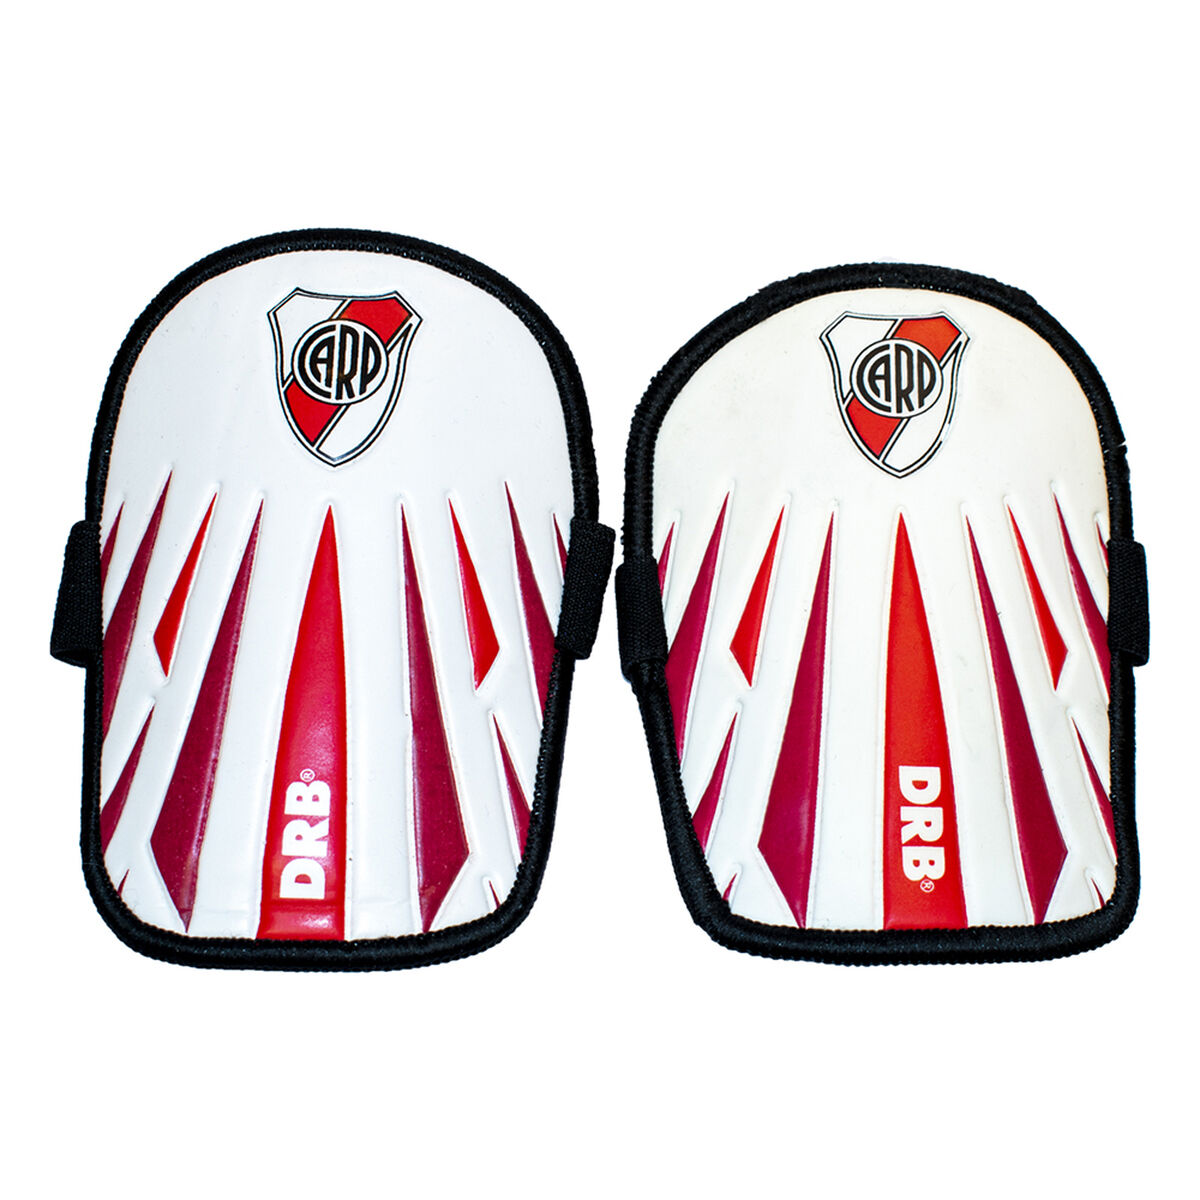 Canilleras Dribbling River Plate